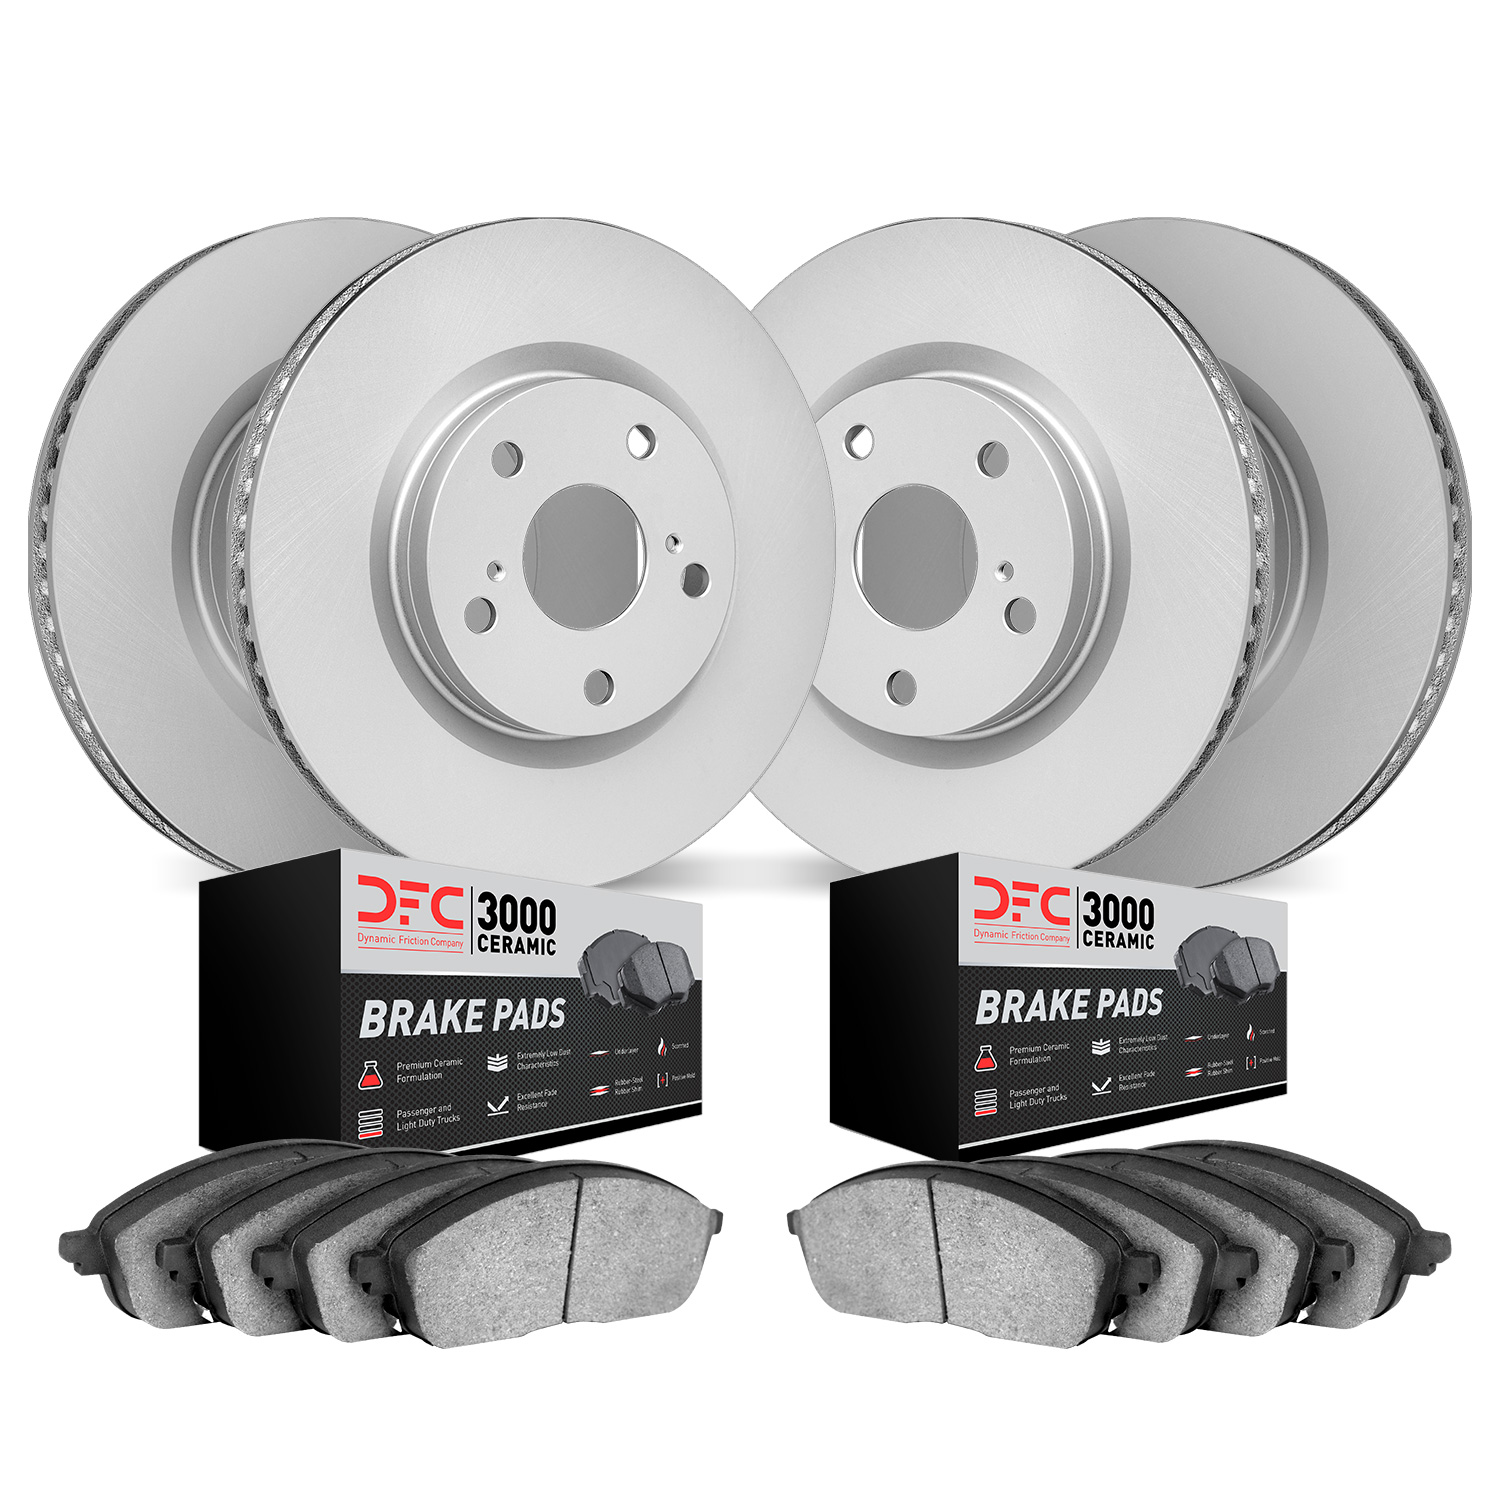 4304-31045 Geospec Brake Rotors with 3000-Series Ceramic Brake Pads Kit, 2004-2010 BMW, Position: Front and Rear